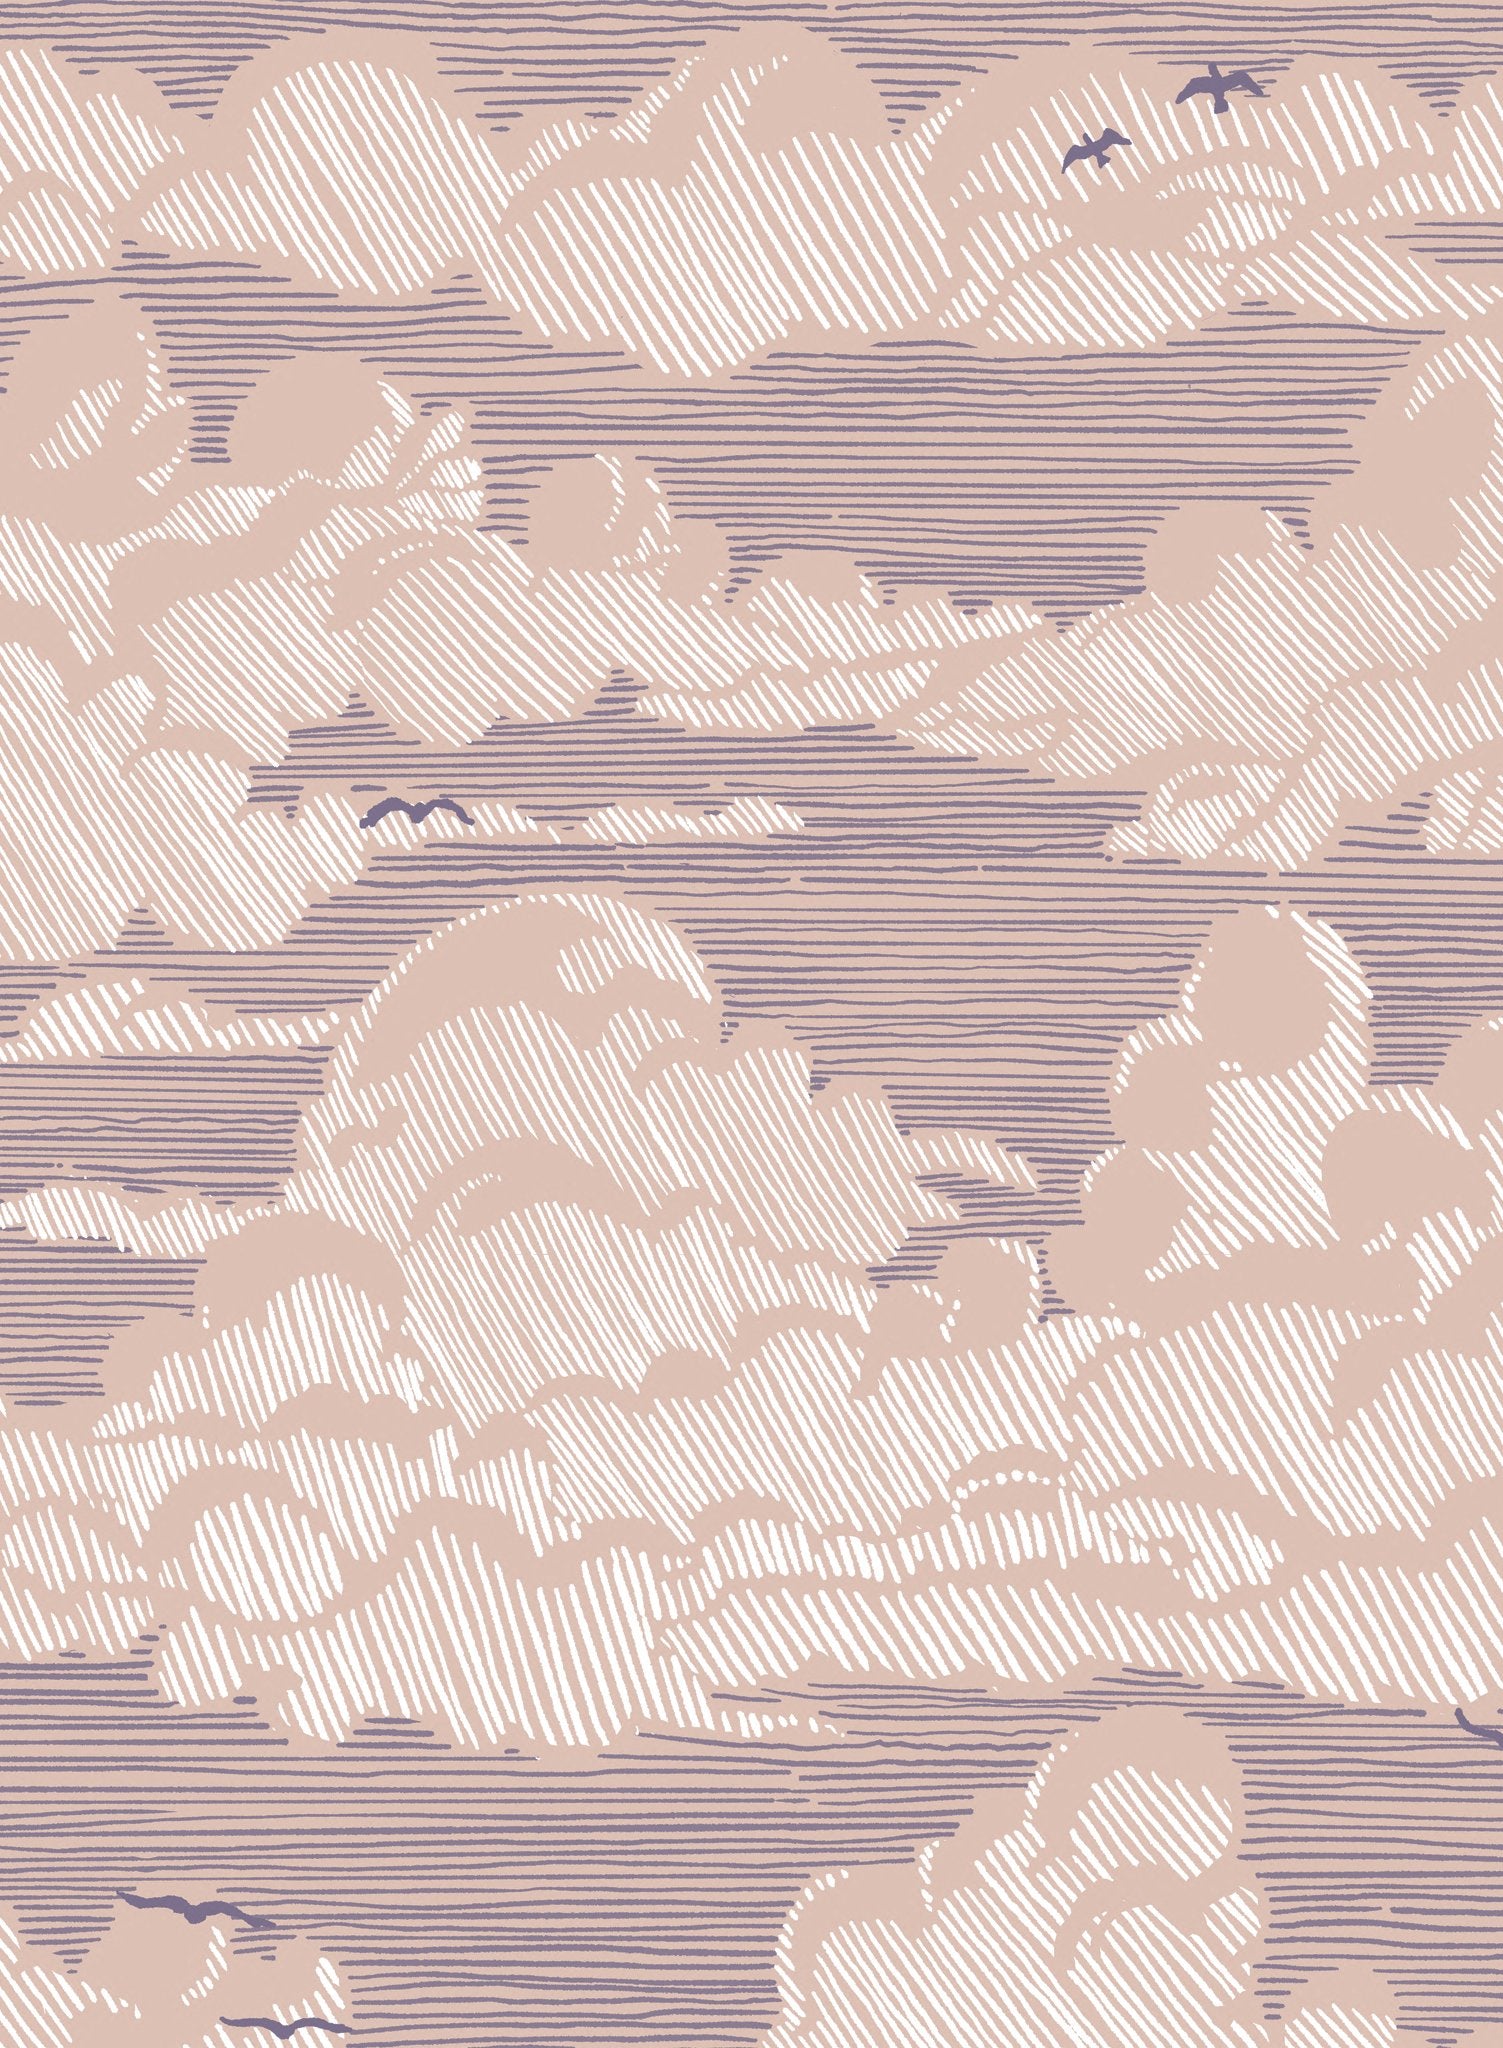 Sky Bound is a minimalist wallpaper by Opposite Wall of a cloudy sky background with birds flying across.